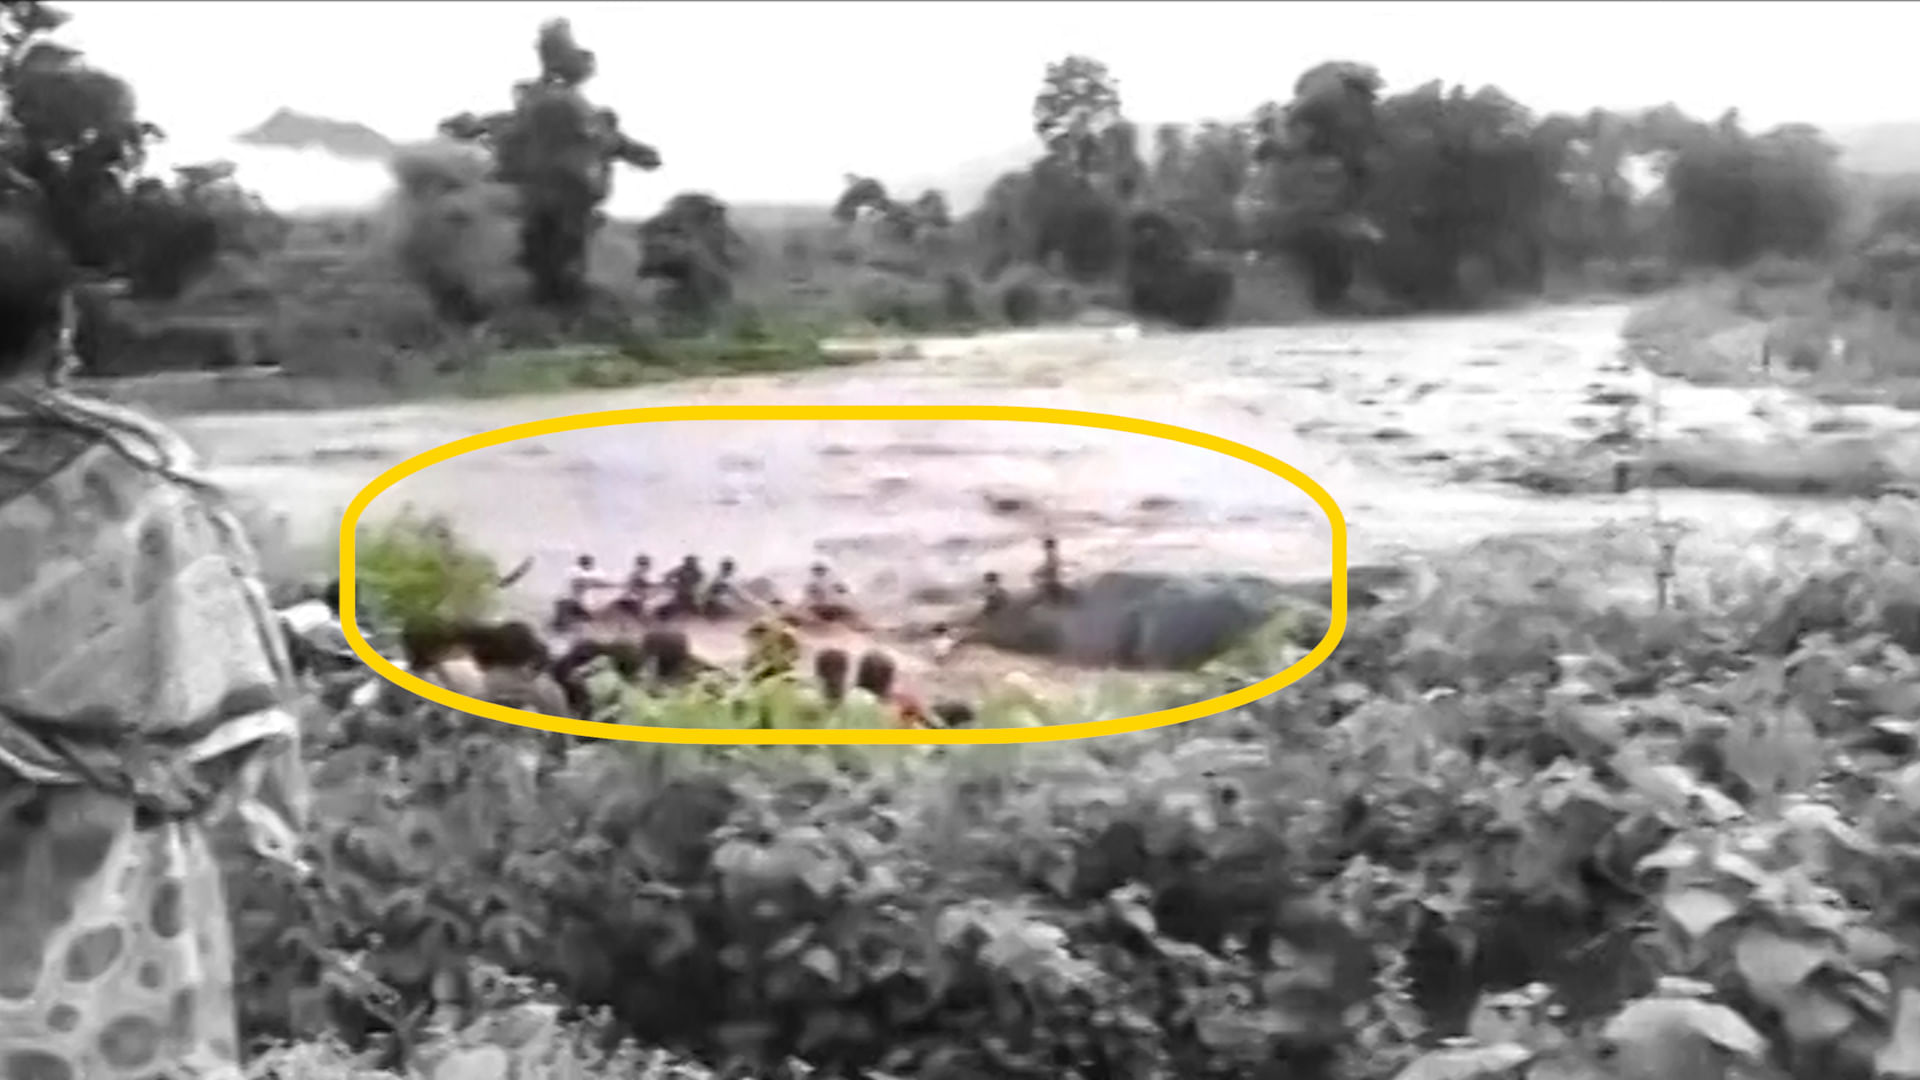 Five kids were playing in the river when the water level suddenly went up. (Photo: ANI screengrab)